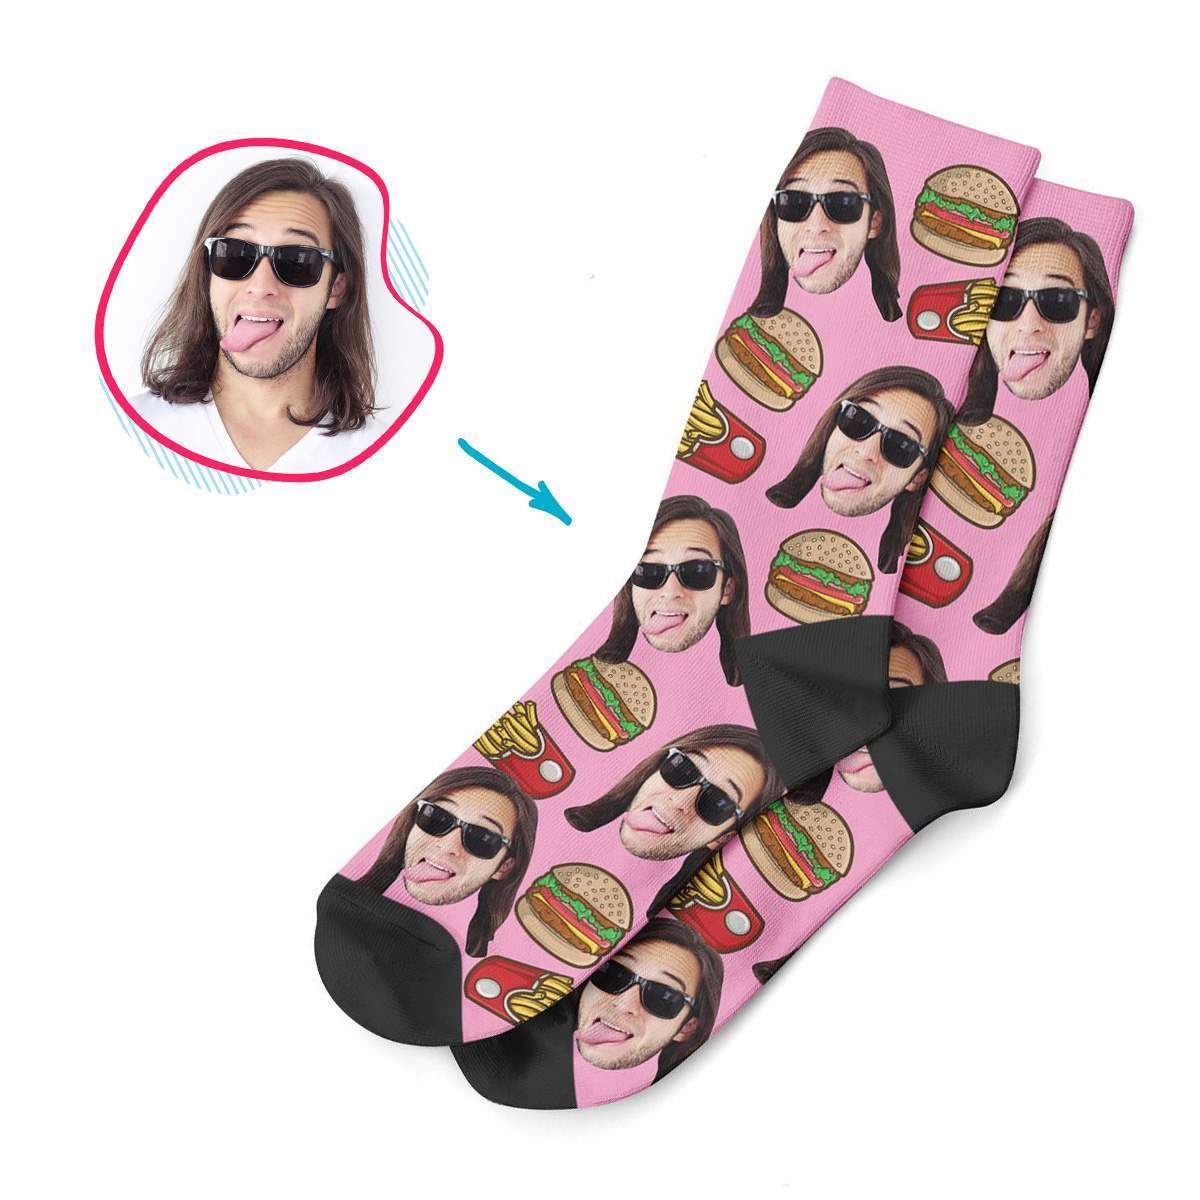 pink Fastfood socks personalized with photo of face printed on them